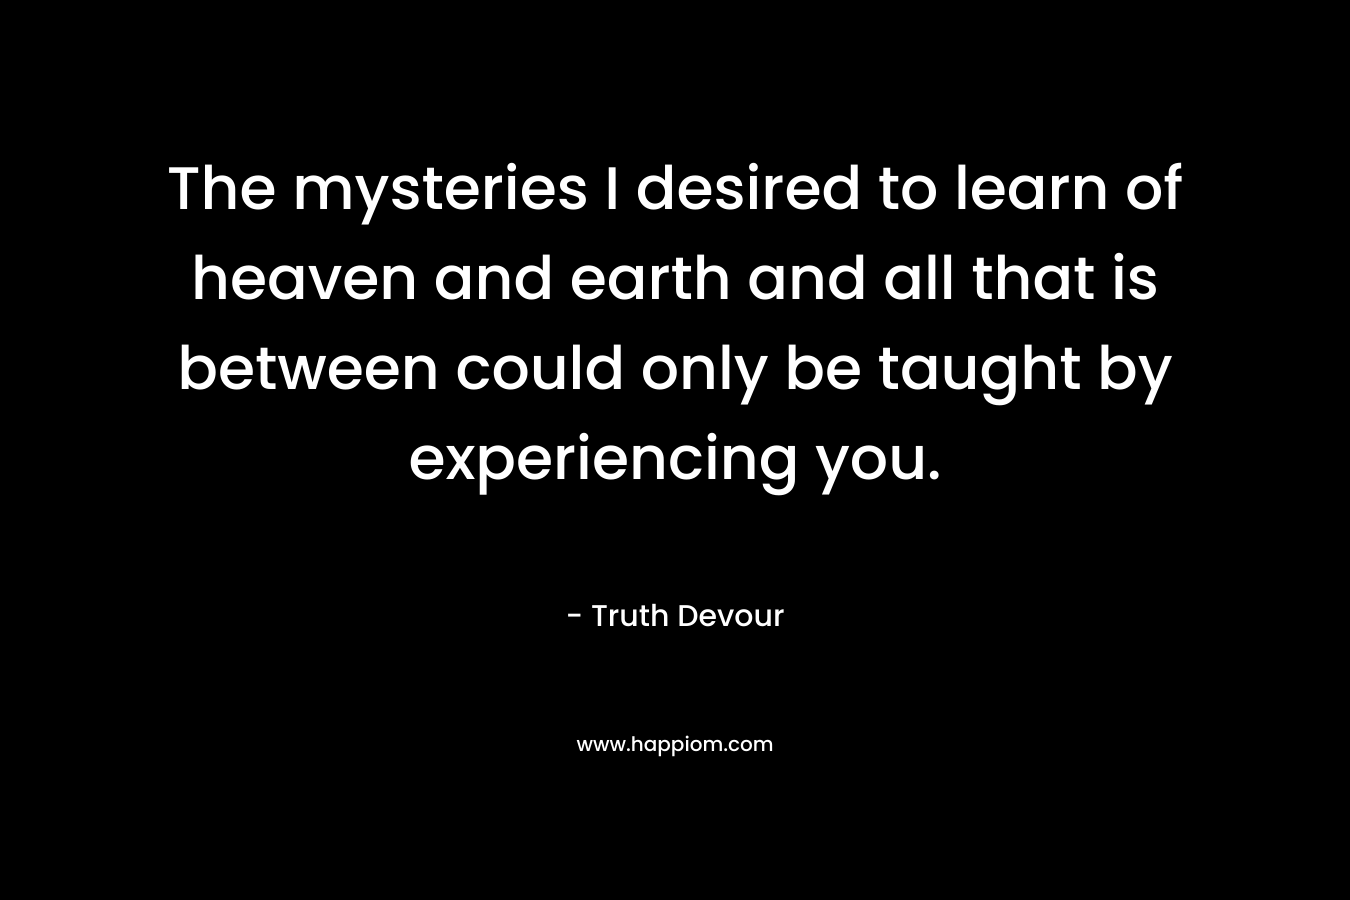 The mysteries I desired to learn of heaven and earth and all that is between could only be taught by experiencing you.